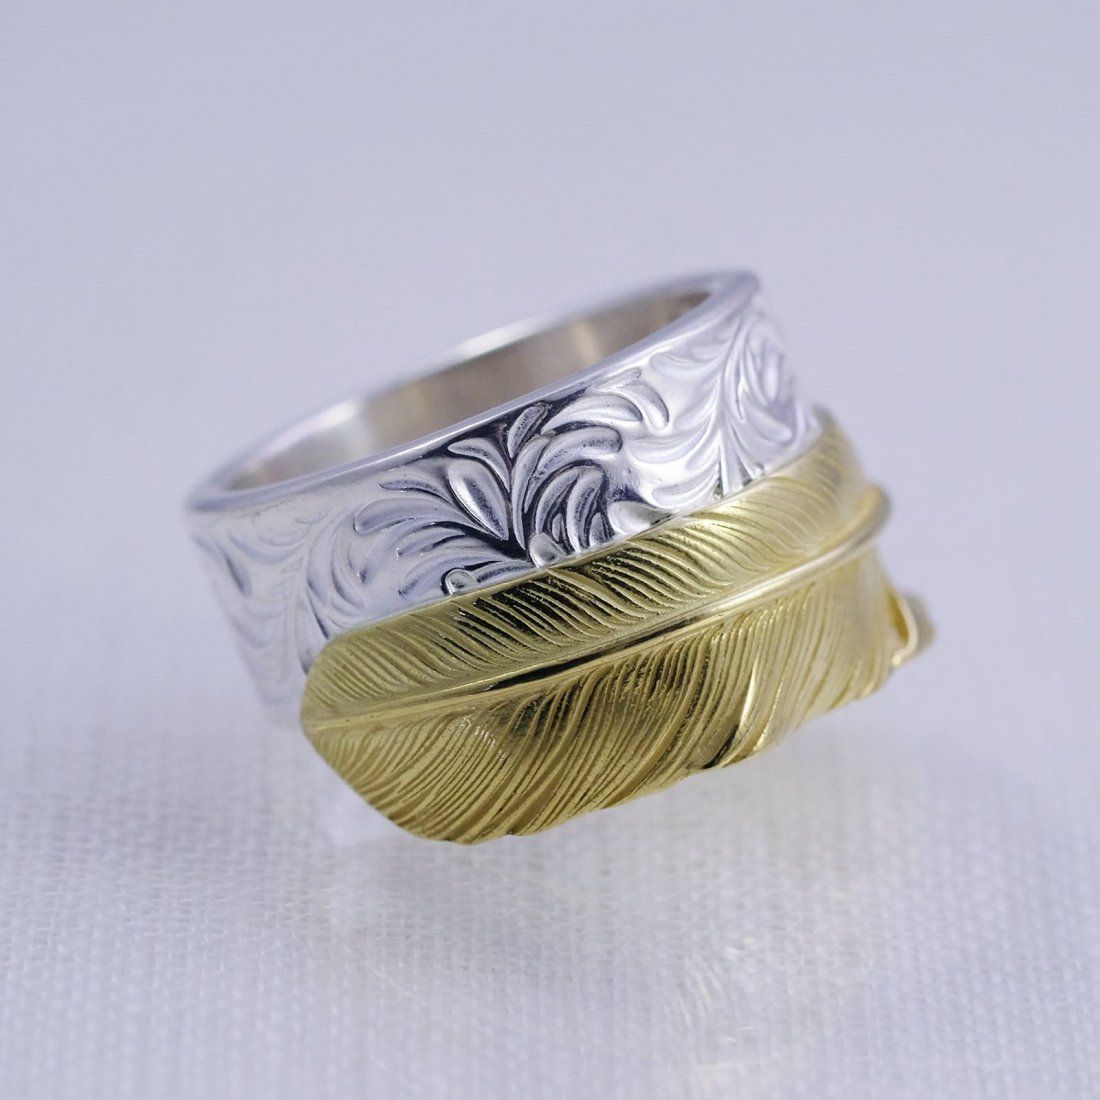 STUDIO T&Y - K18 Feather Ring 1 (GOLD/SILVER) / 18金フェザー 